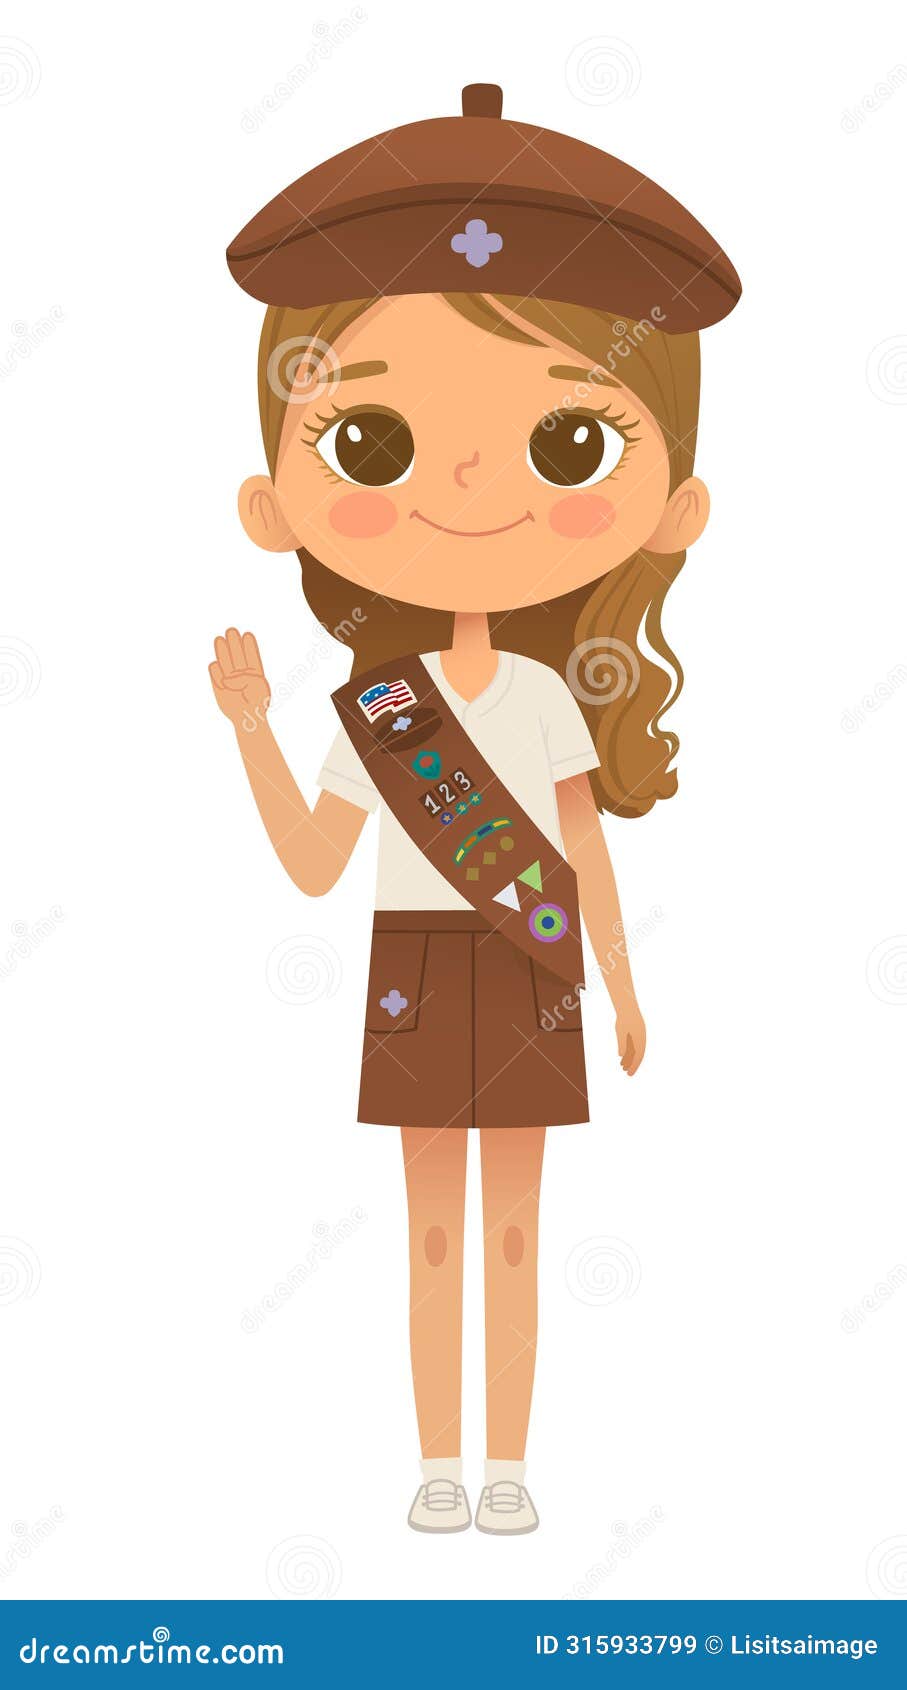 young smiling girl scout wearing sash